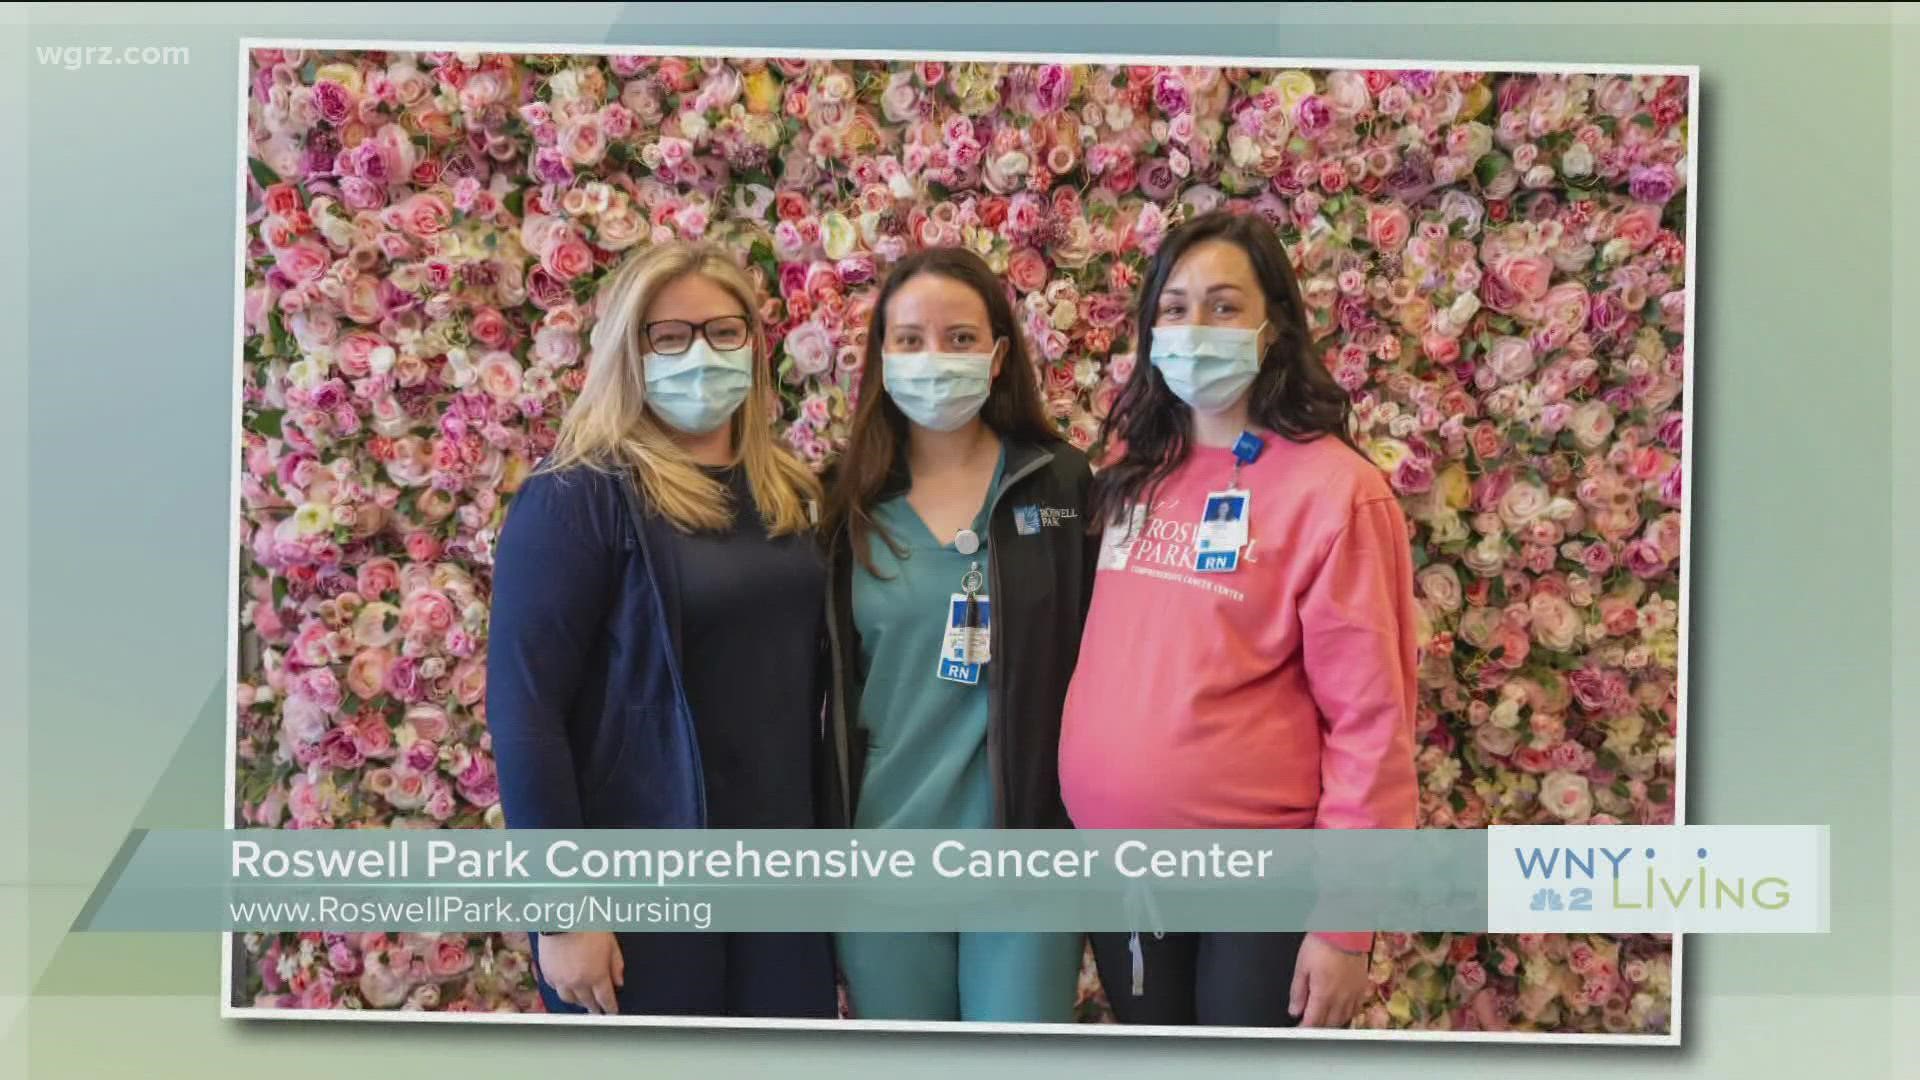 WNY Living - May 14 - Roswell Park Comprehensive Cancer Center (THIS VIDEO IS SPONSORED BY ROSWELL PARK COMPREHENSIVE CANCER CENTER)